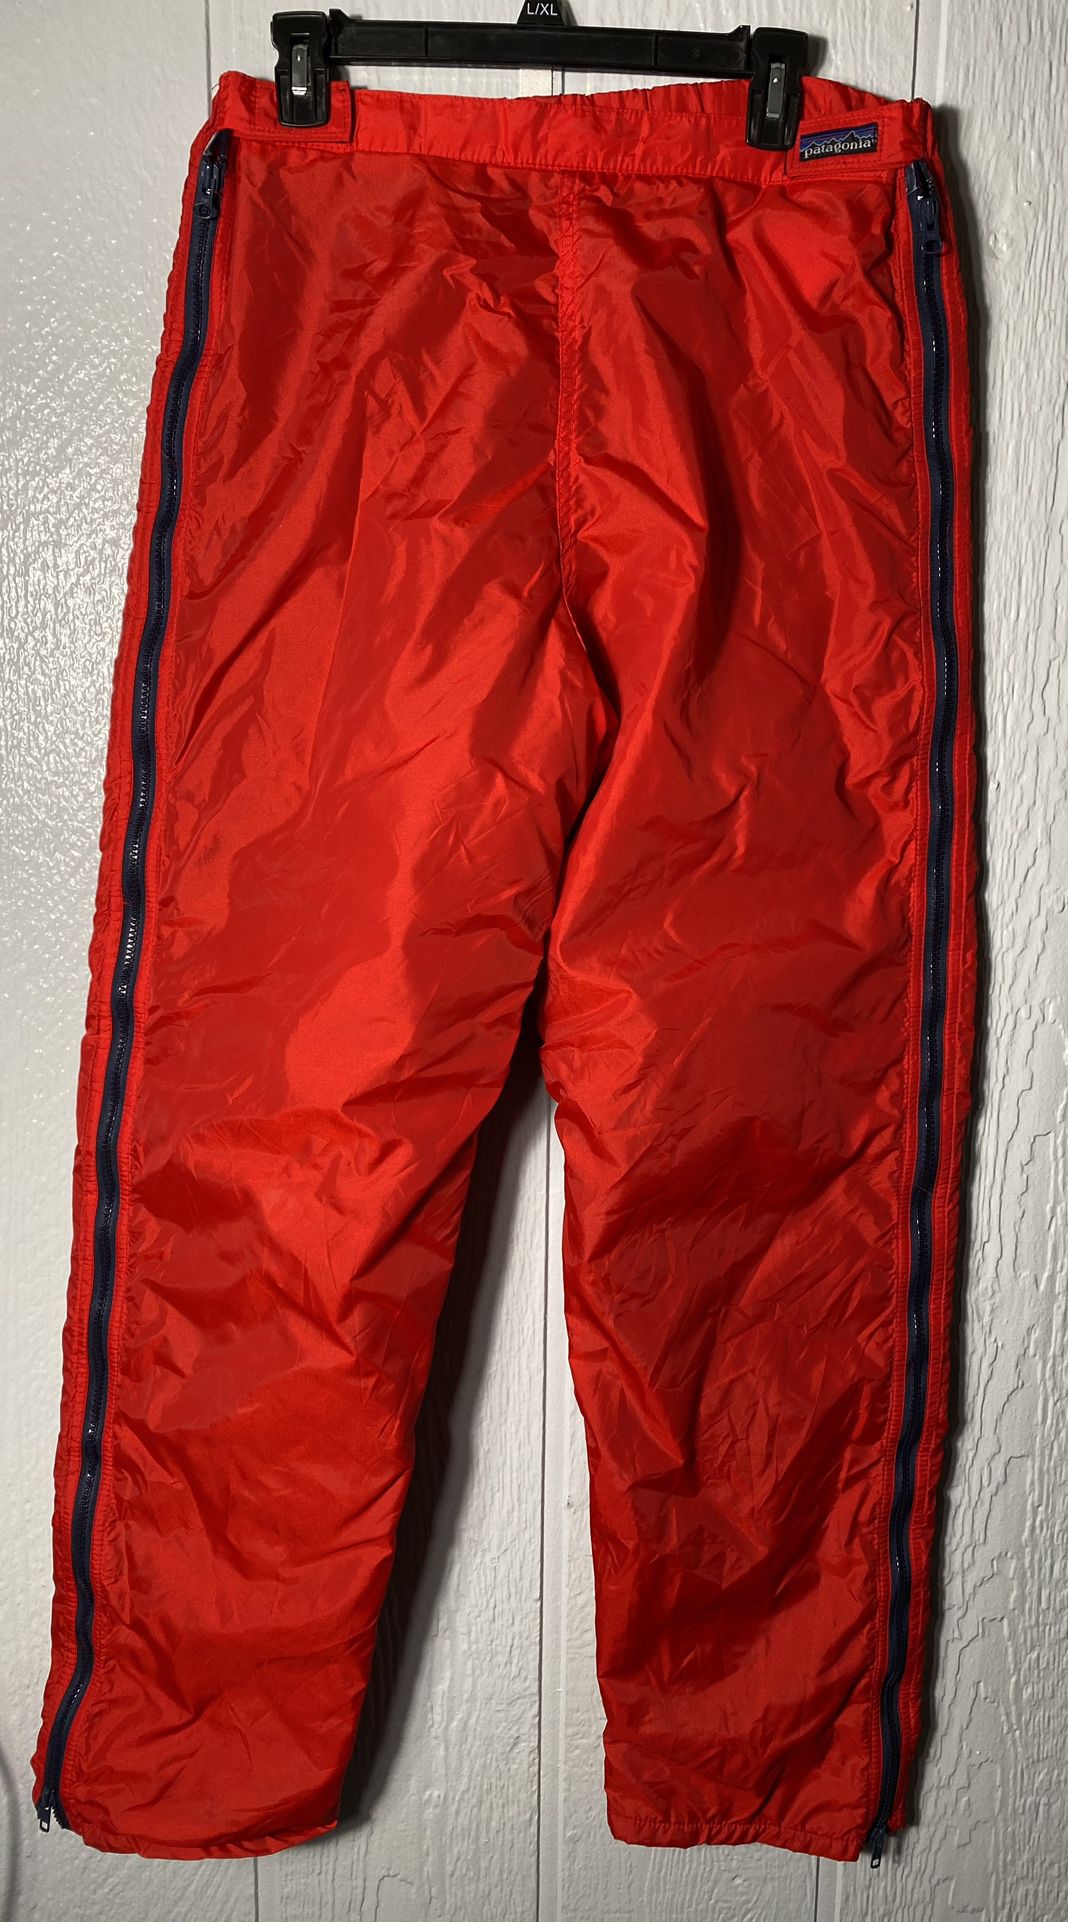 Vintage 80’s Patagonia Fleece Lined Nylon Pants Red /Blue -L